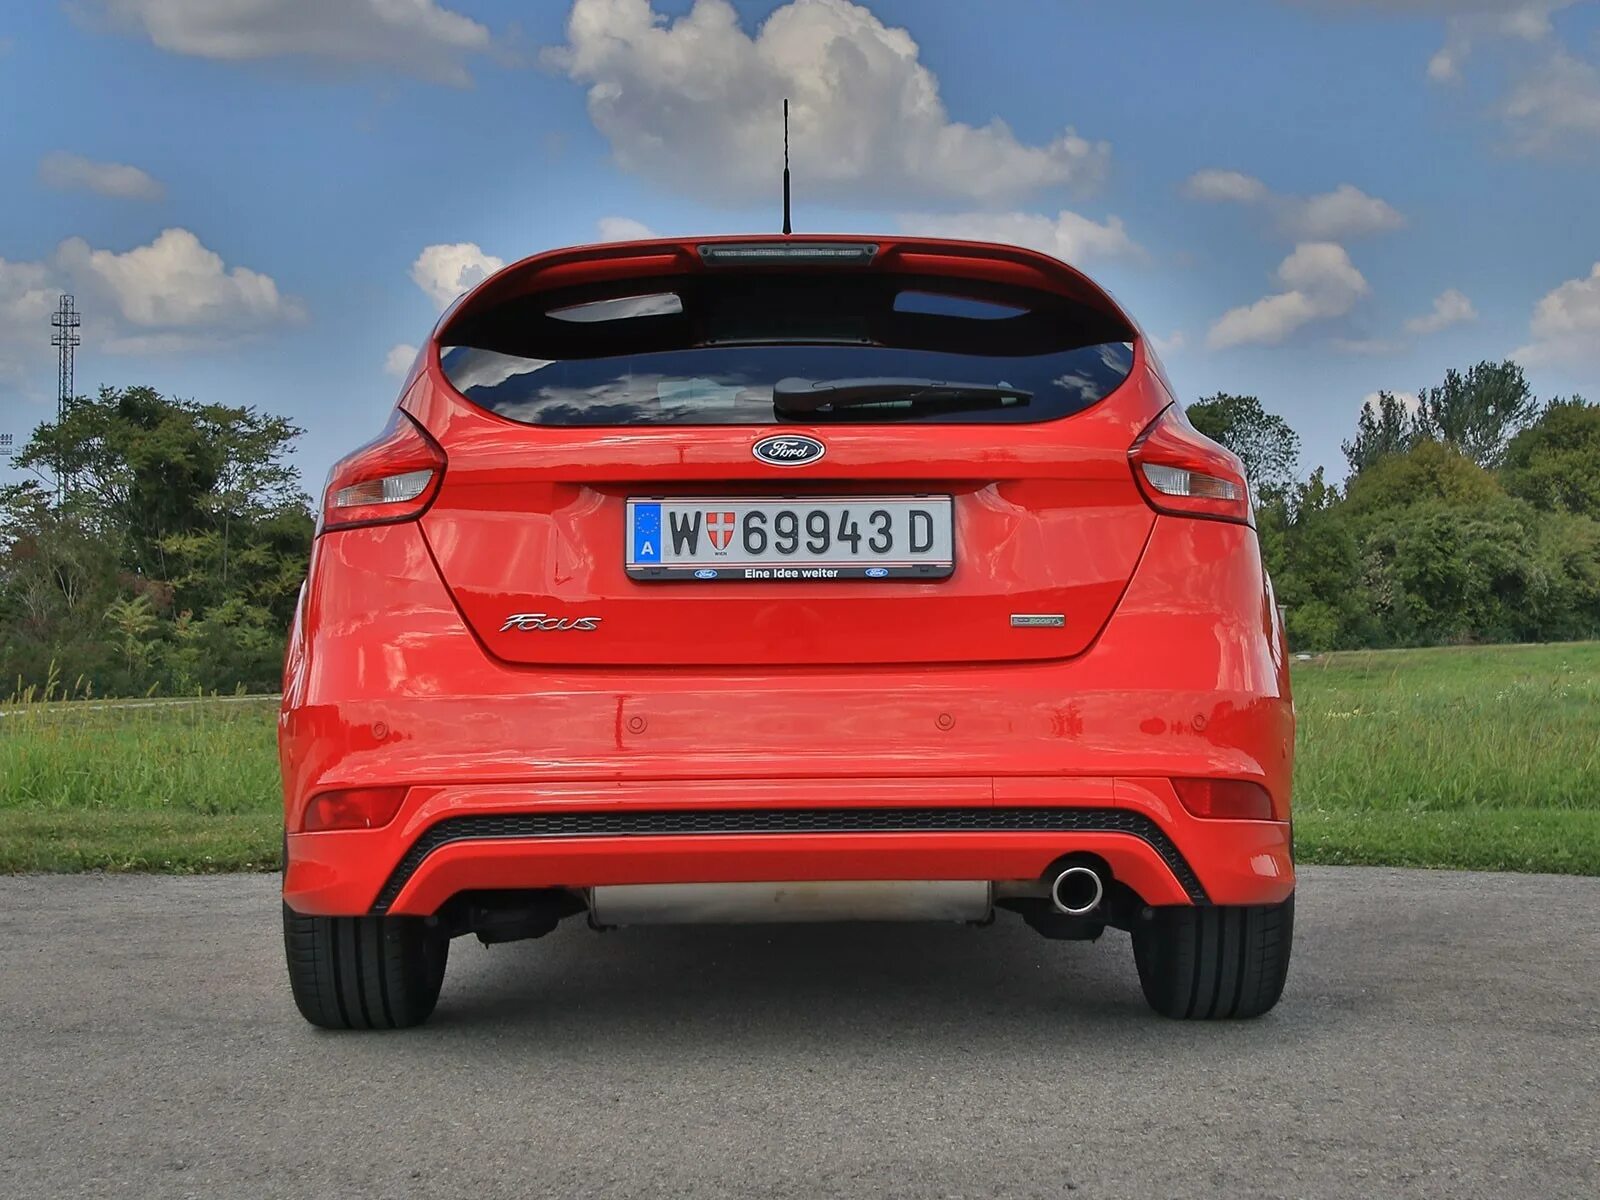 Фокус 3 St line. Ford Focus St line. Ford Focus 4 St line. Ford Focus 3 St line универсал. Форд лайн